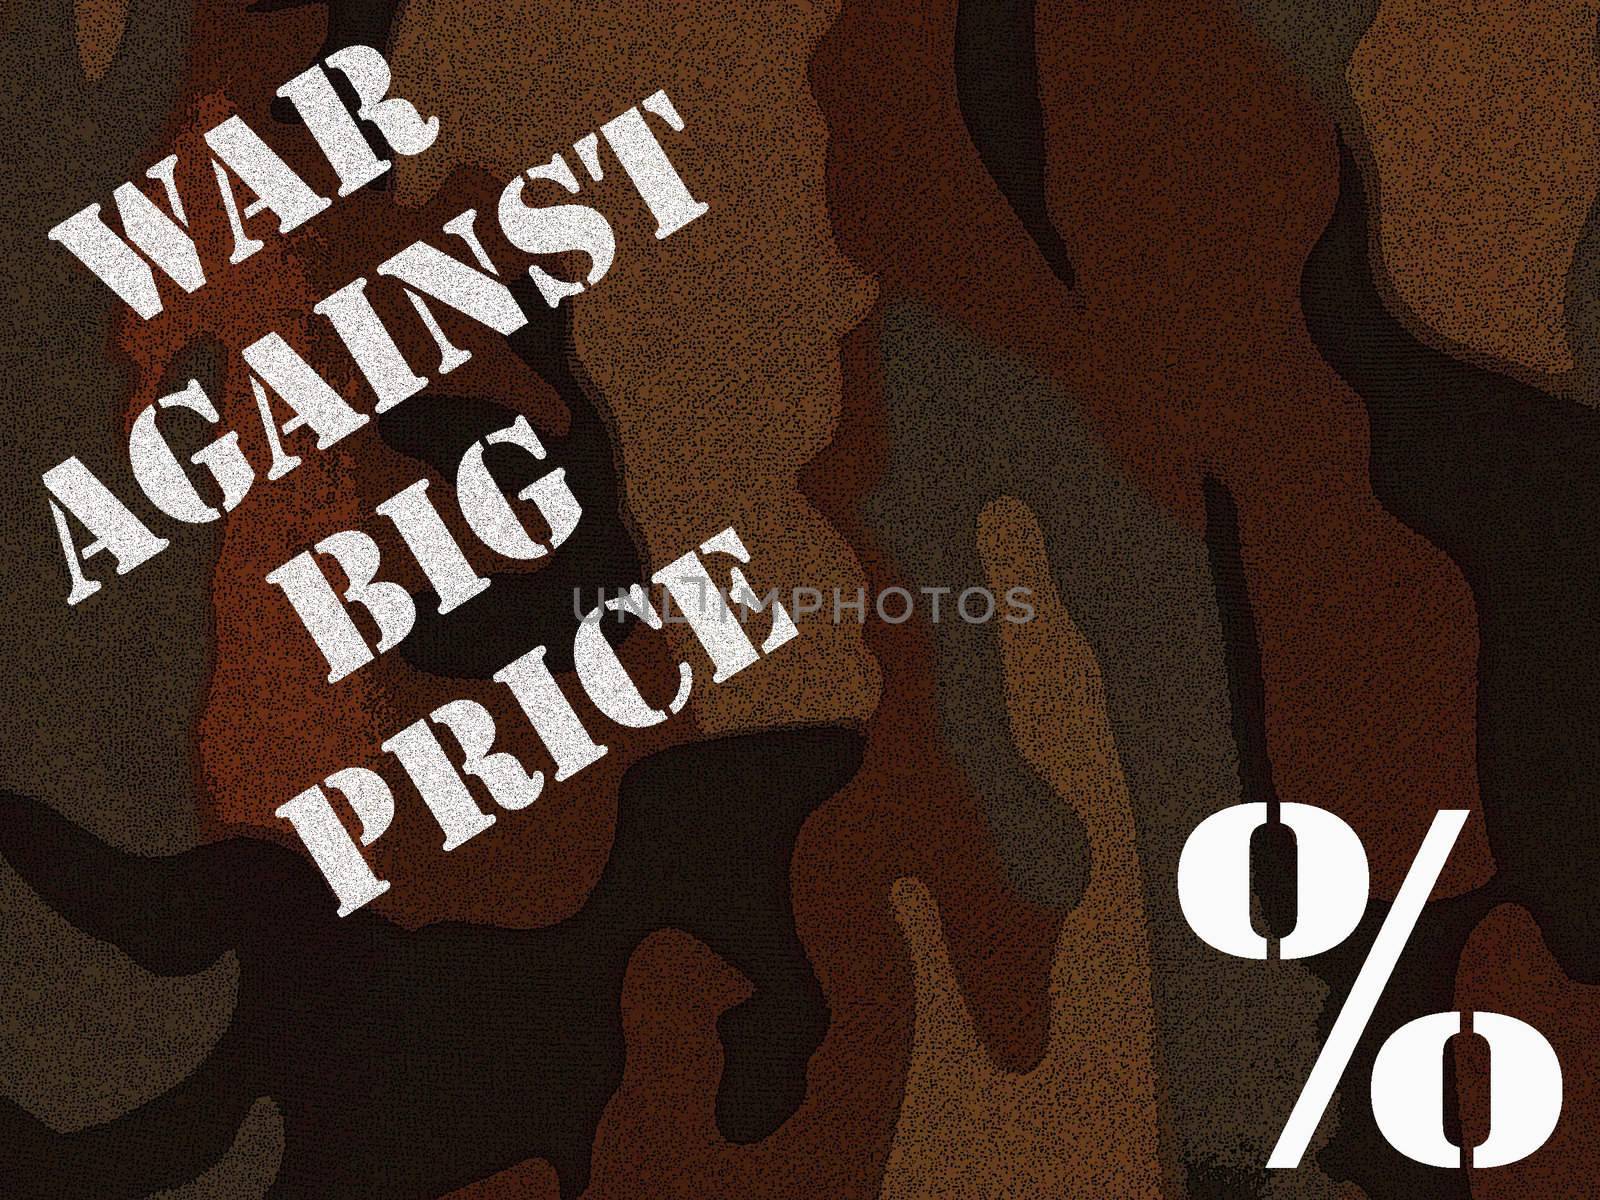 WAR AGAINST BIG PRICE TYPE OVER THE CAMOUFLAGE BACKGROUND